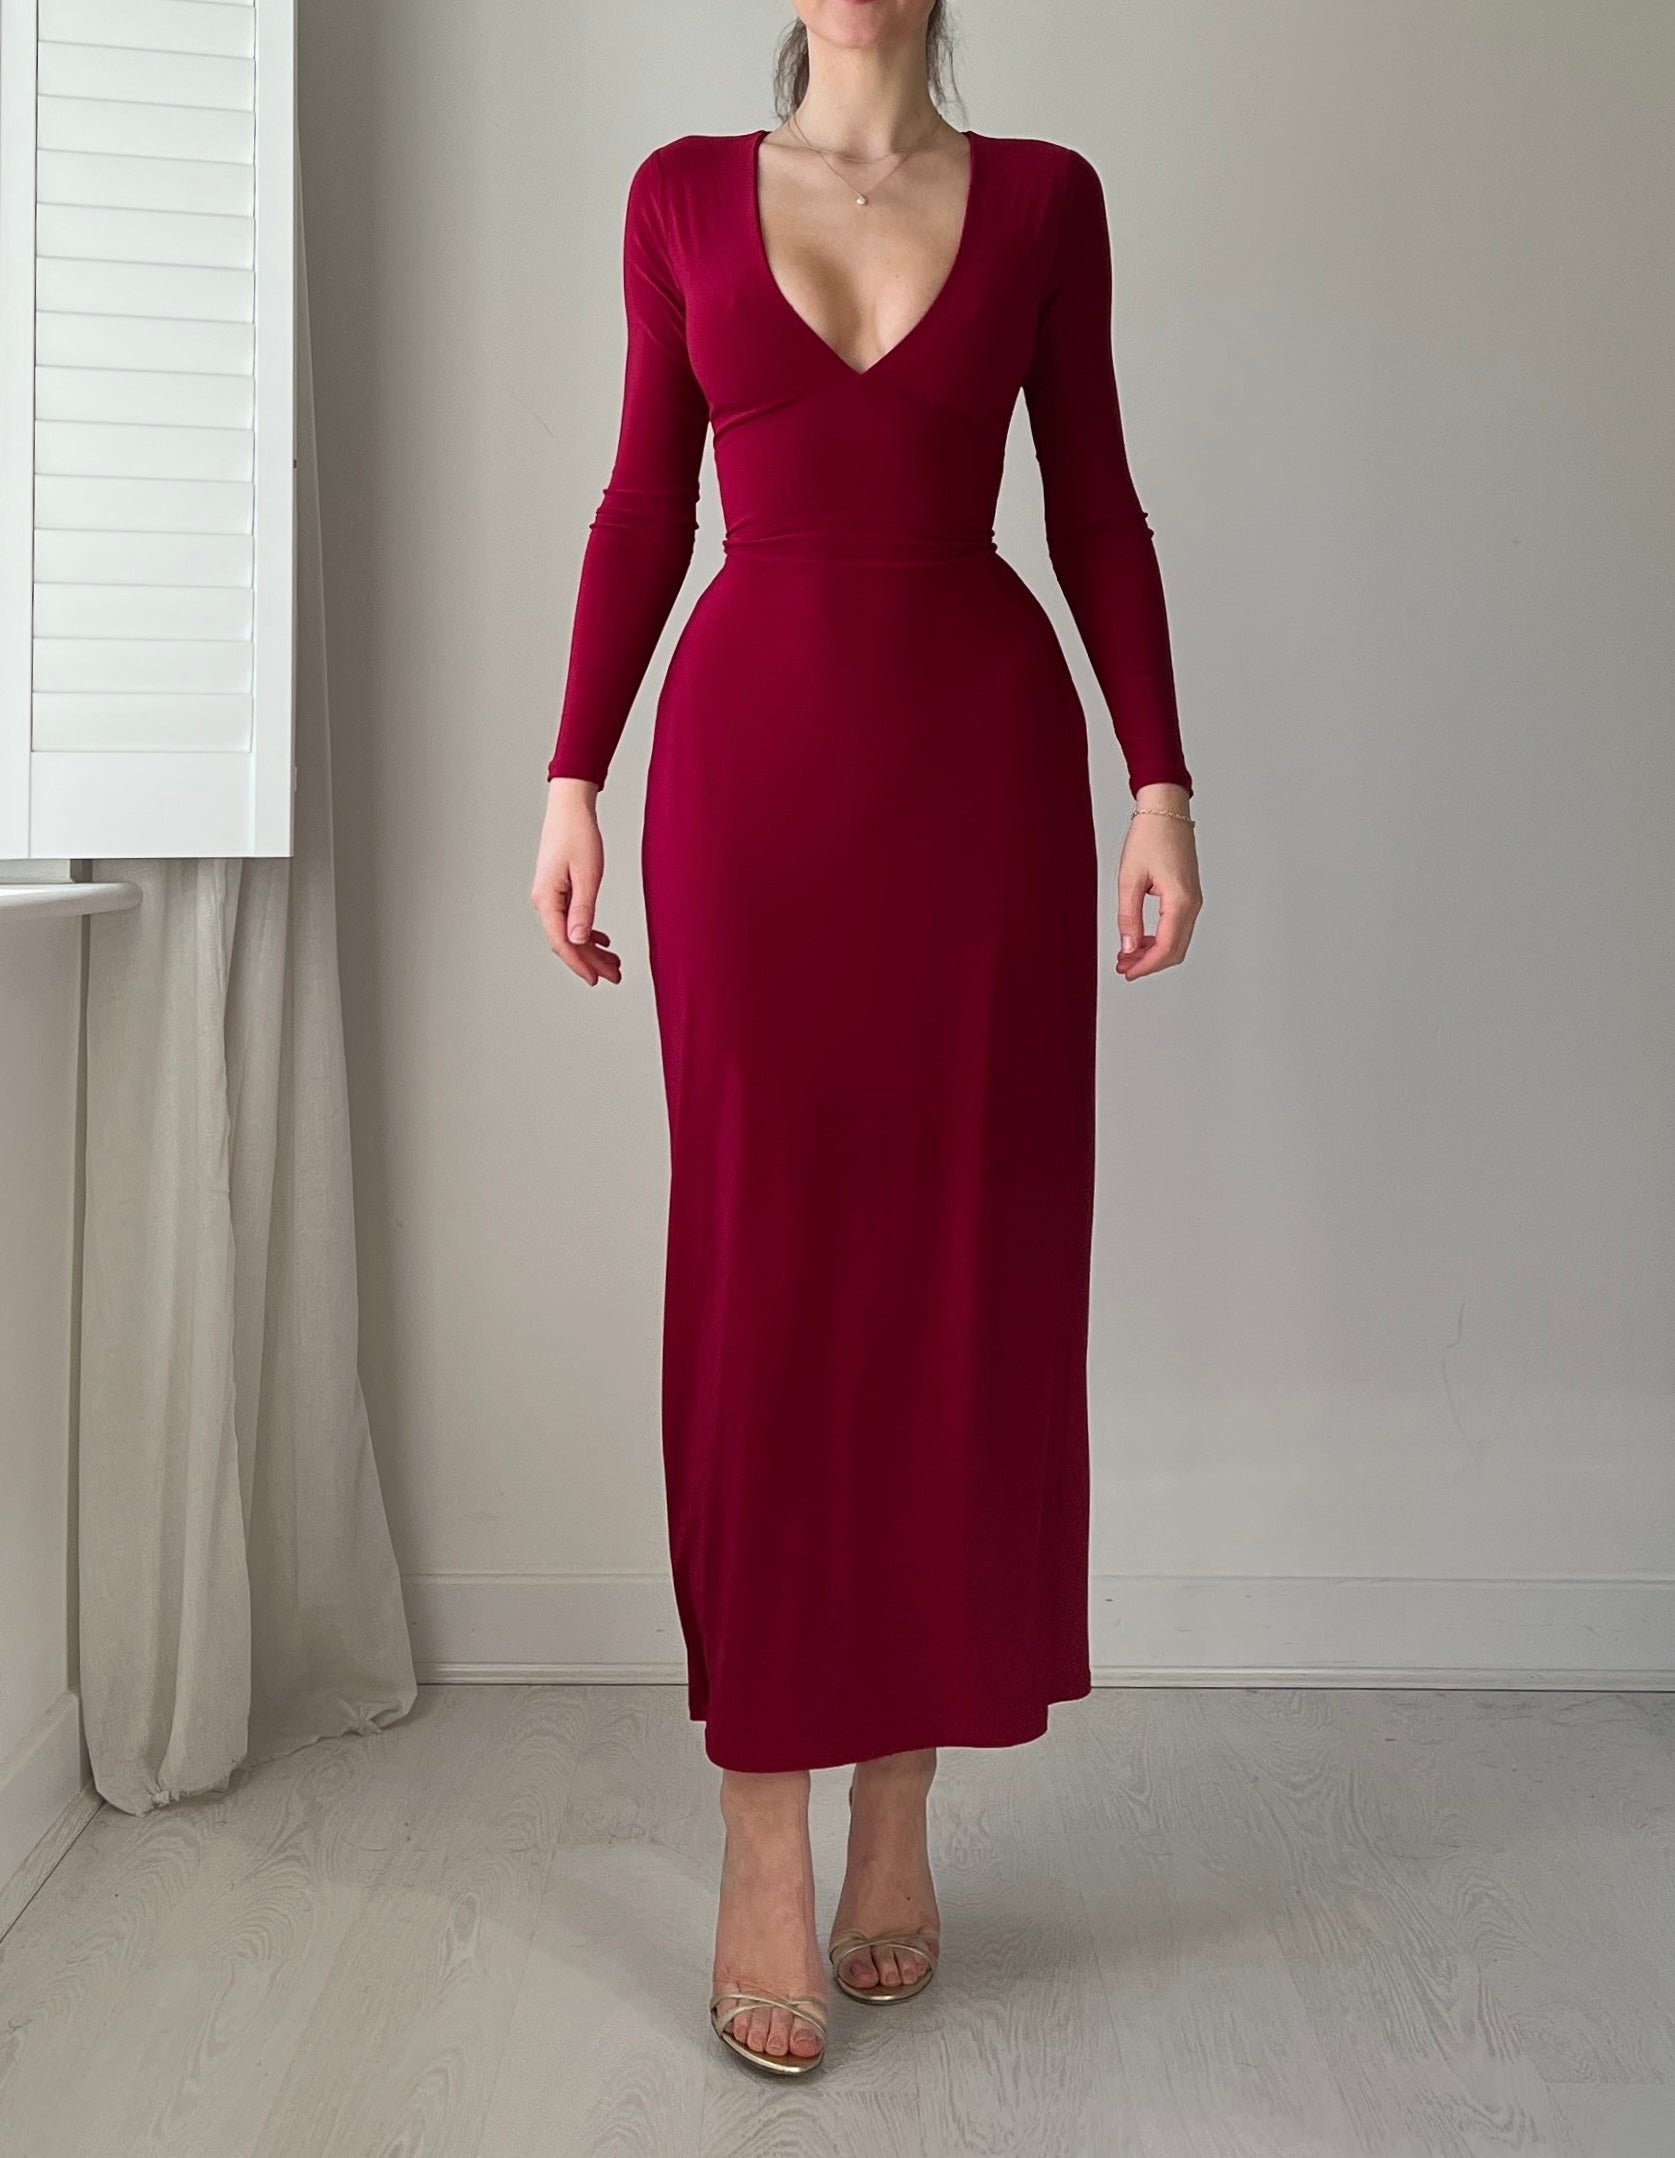 AYM Taylor Dress in Wine Red - S / UK 8, Women's Fashion, Dresses & Sets,  Dresses on Carousell